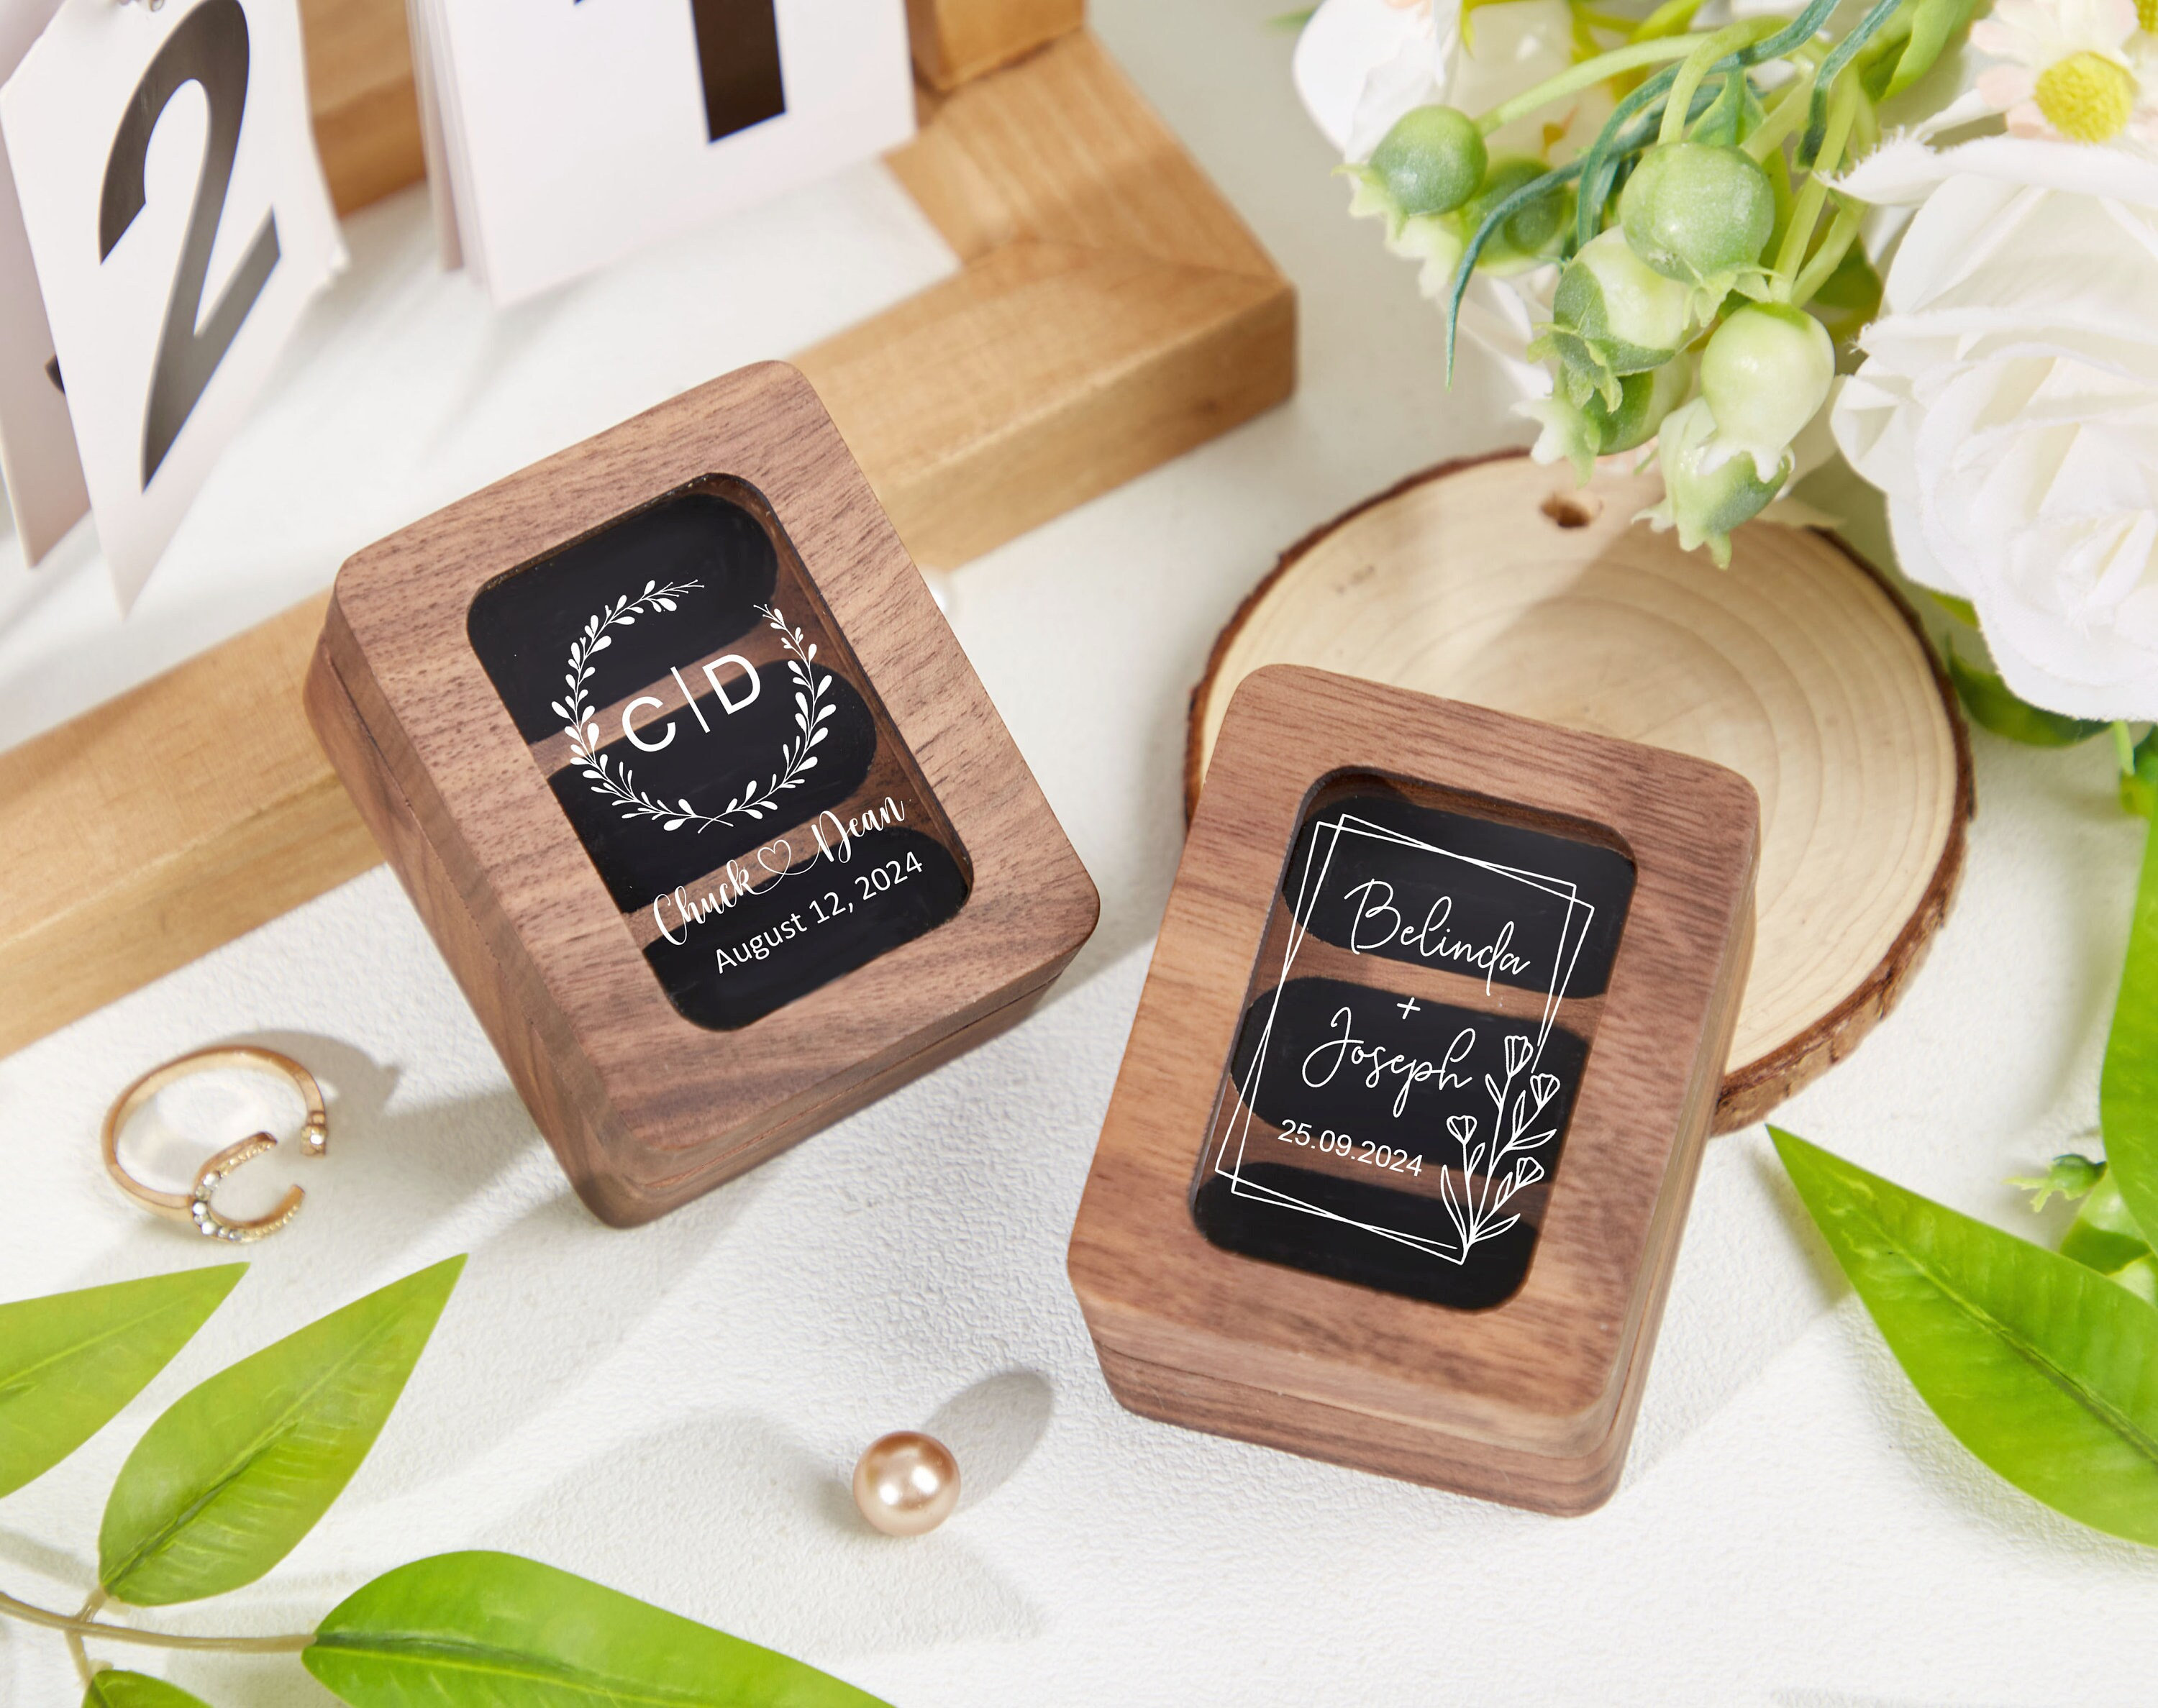 Ring Bearer Gifts - Ideas for Little MVP of Your Big Day - Groovy Groomsmen  Gifts